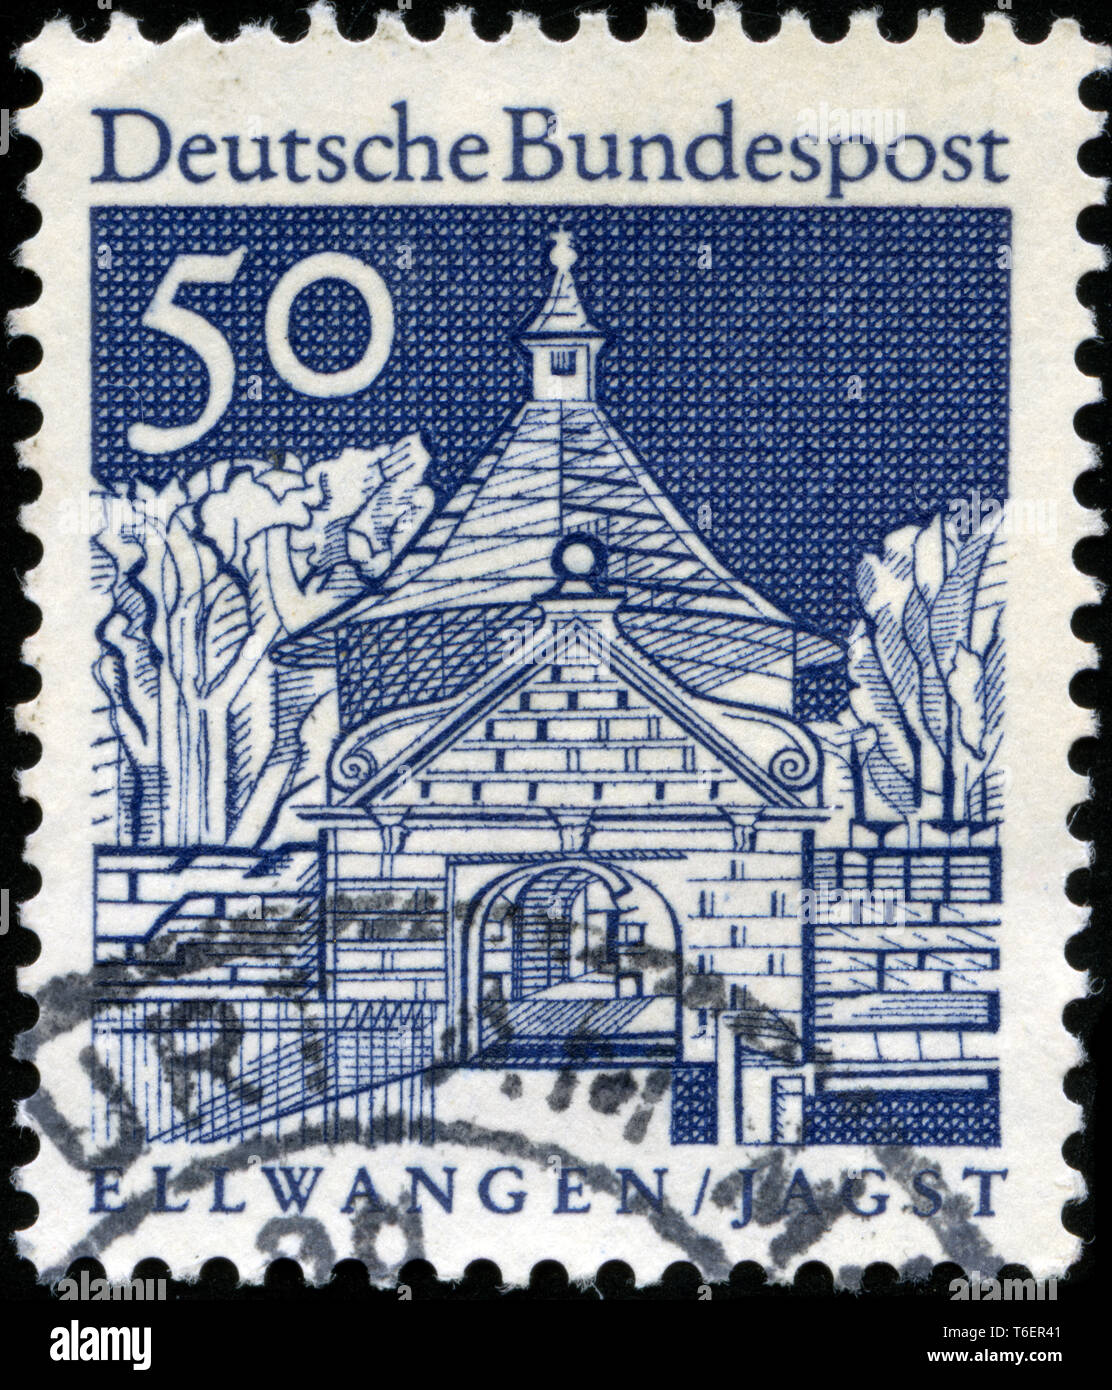 Postage stamp from the Federal Republic of Germany in the German buildings from twelve centuries, large size series issued in 1967 Stock Photo